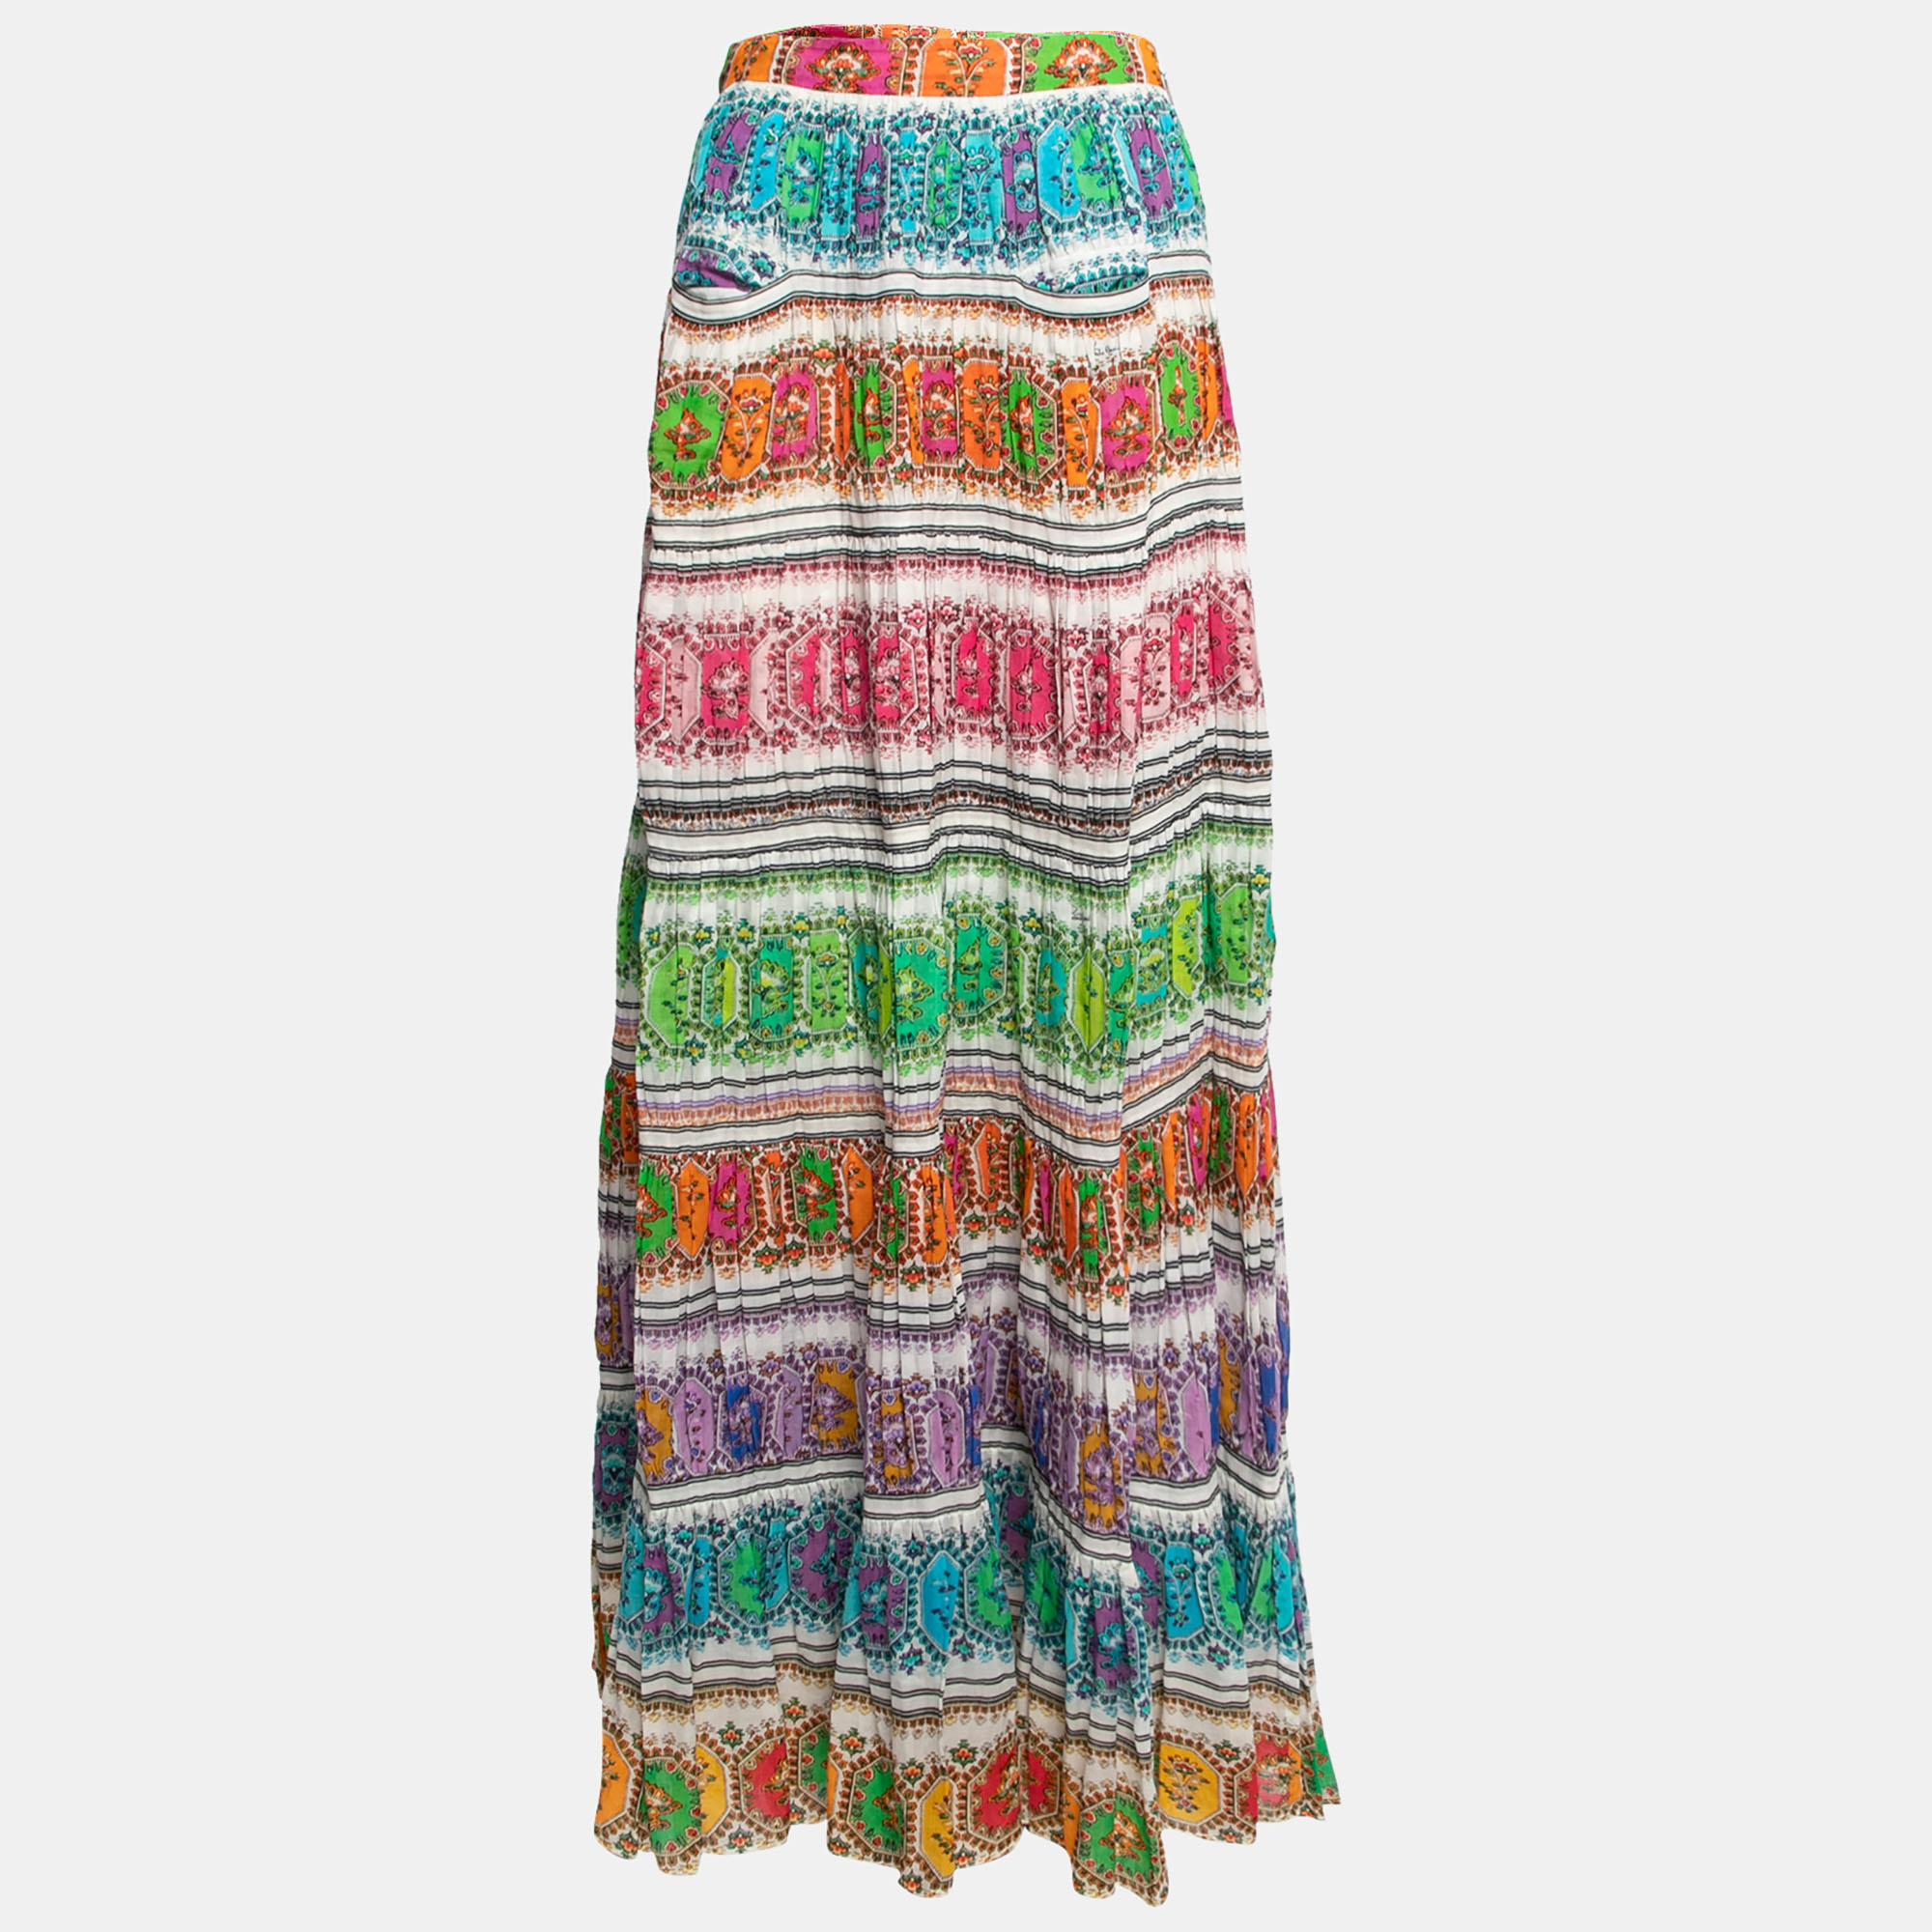 This skirt from Roberto Cavalli is a beautiful sight. It is fashioned in multicolored printed cotton fabric into a maxi-length silhouette. It is equipped with a zipper fastening. Match this skirt with a basic top and look absolutely gorgeous.

